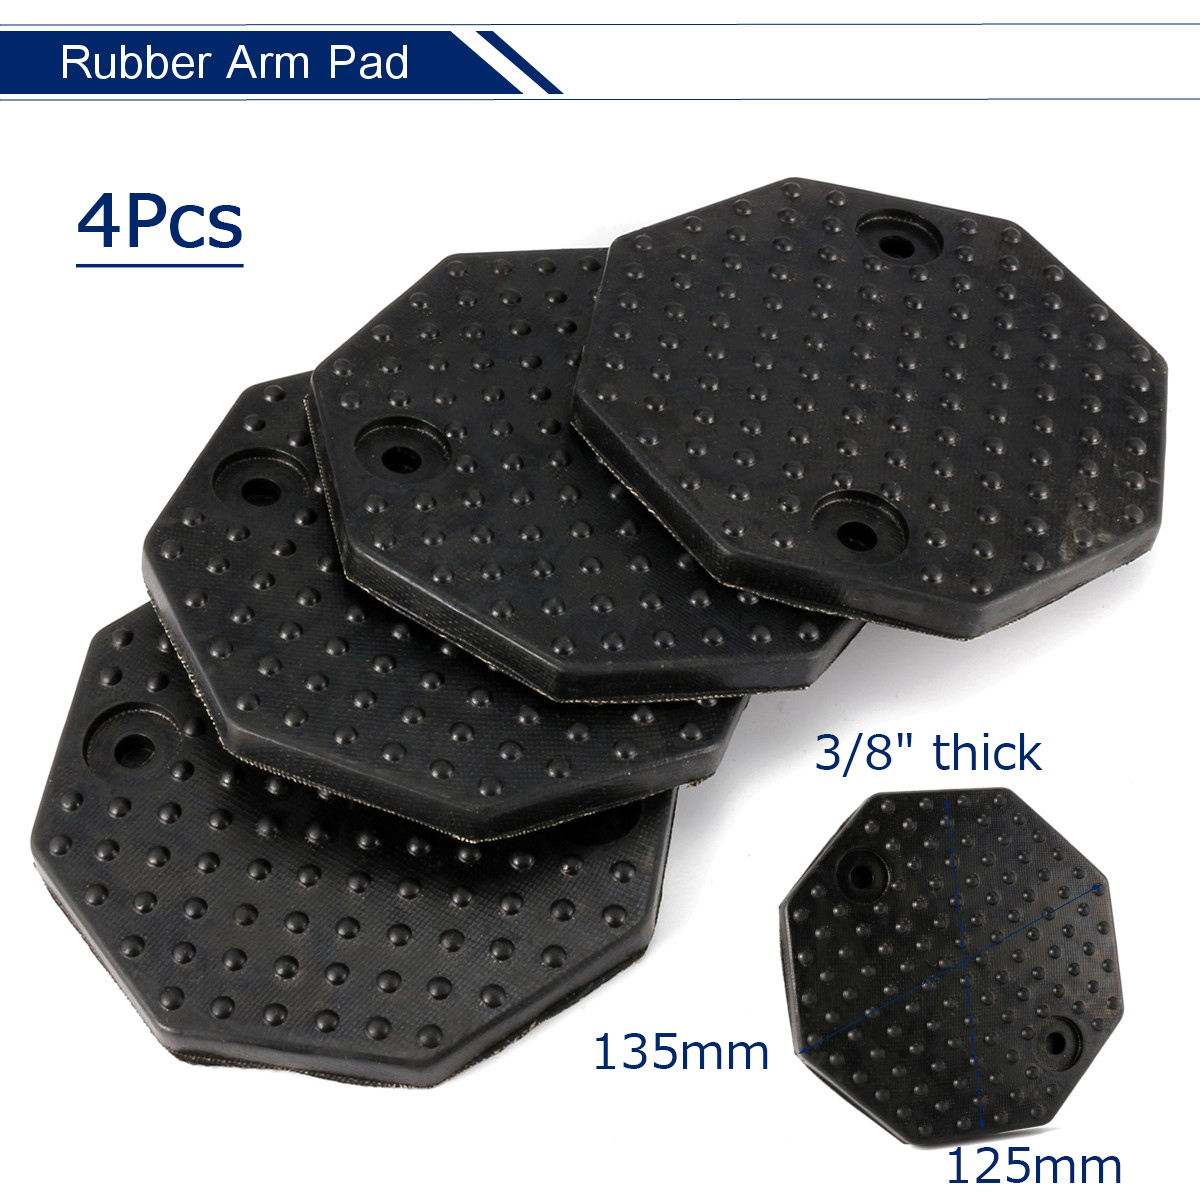 4PCS Octagon Rubber Arm Car Lift Tray Pad Accessories for Car Truck Substantial Rubber Mat